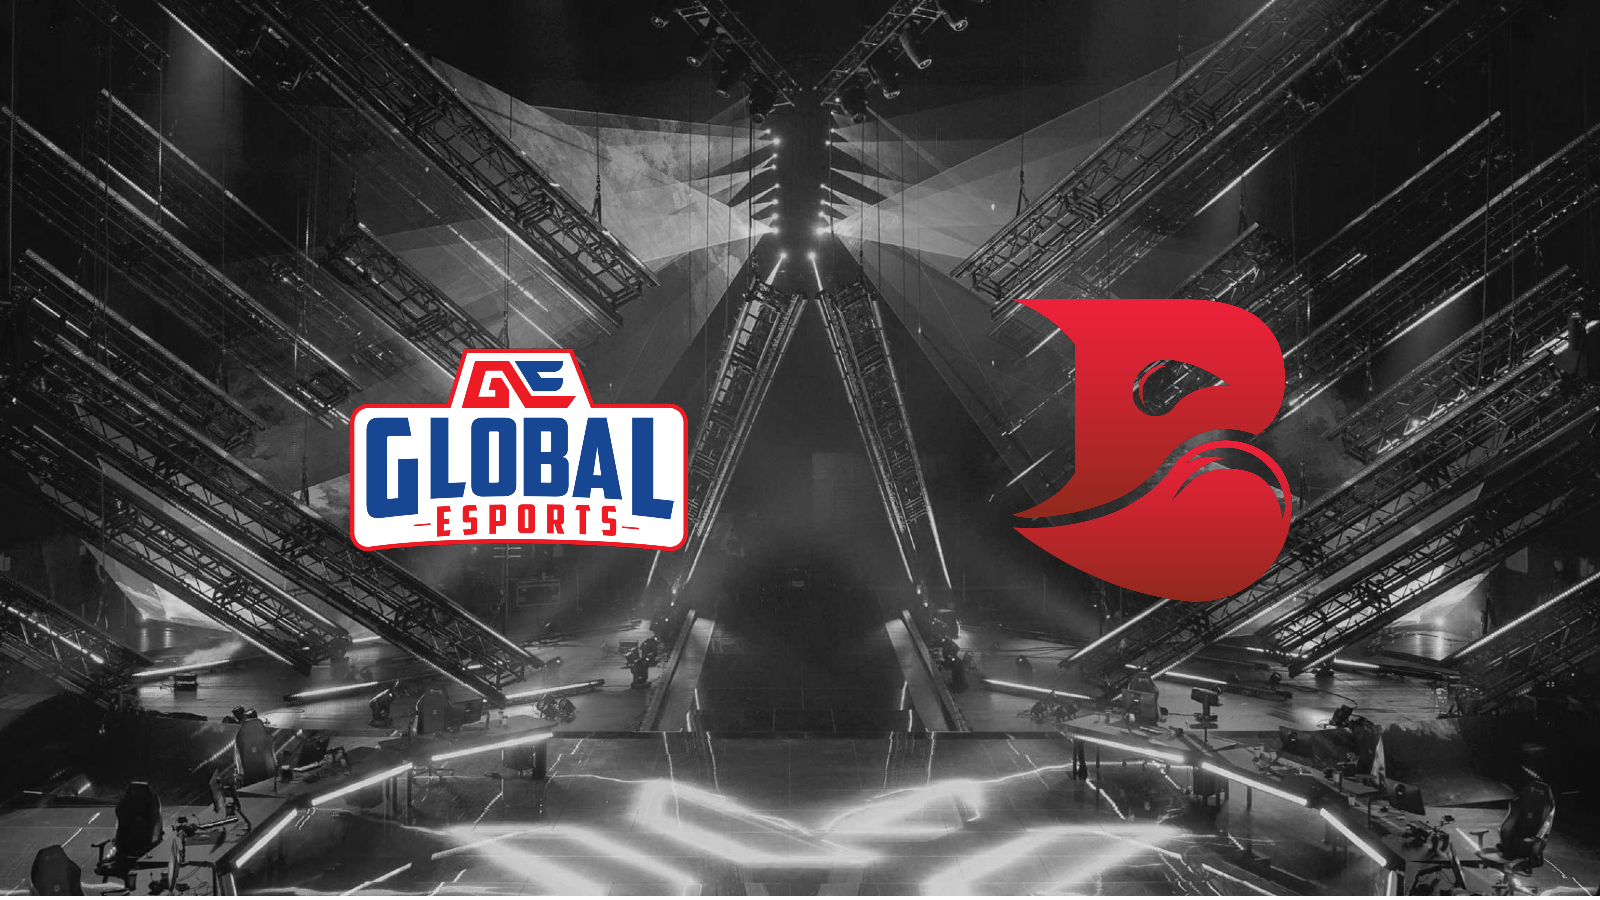 Sources: Global Esports’ partnership talks with Bleed break down over Valorant league rules